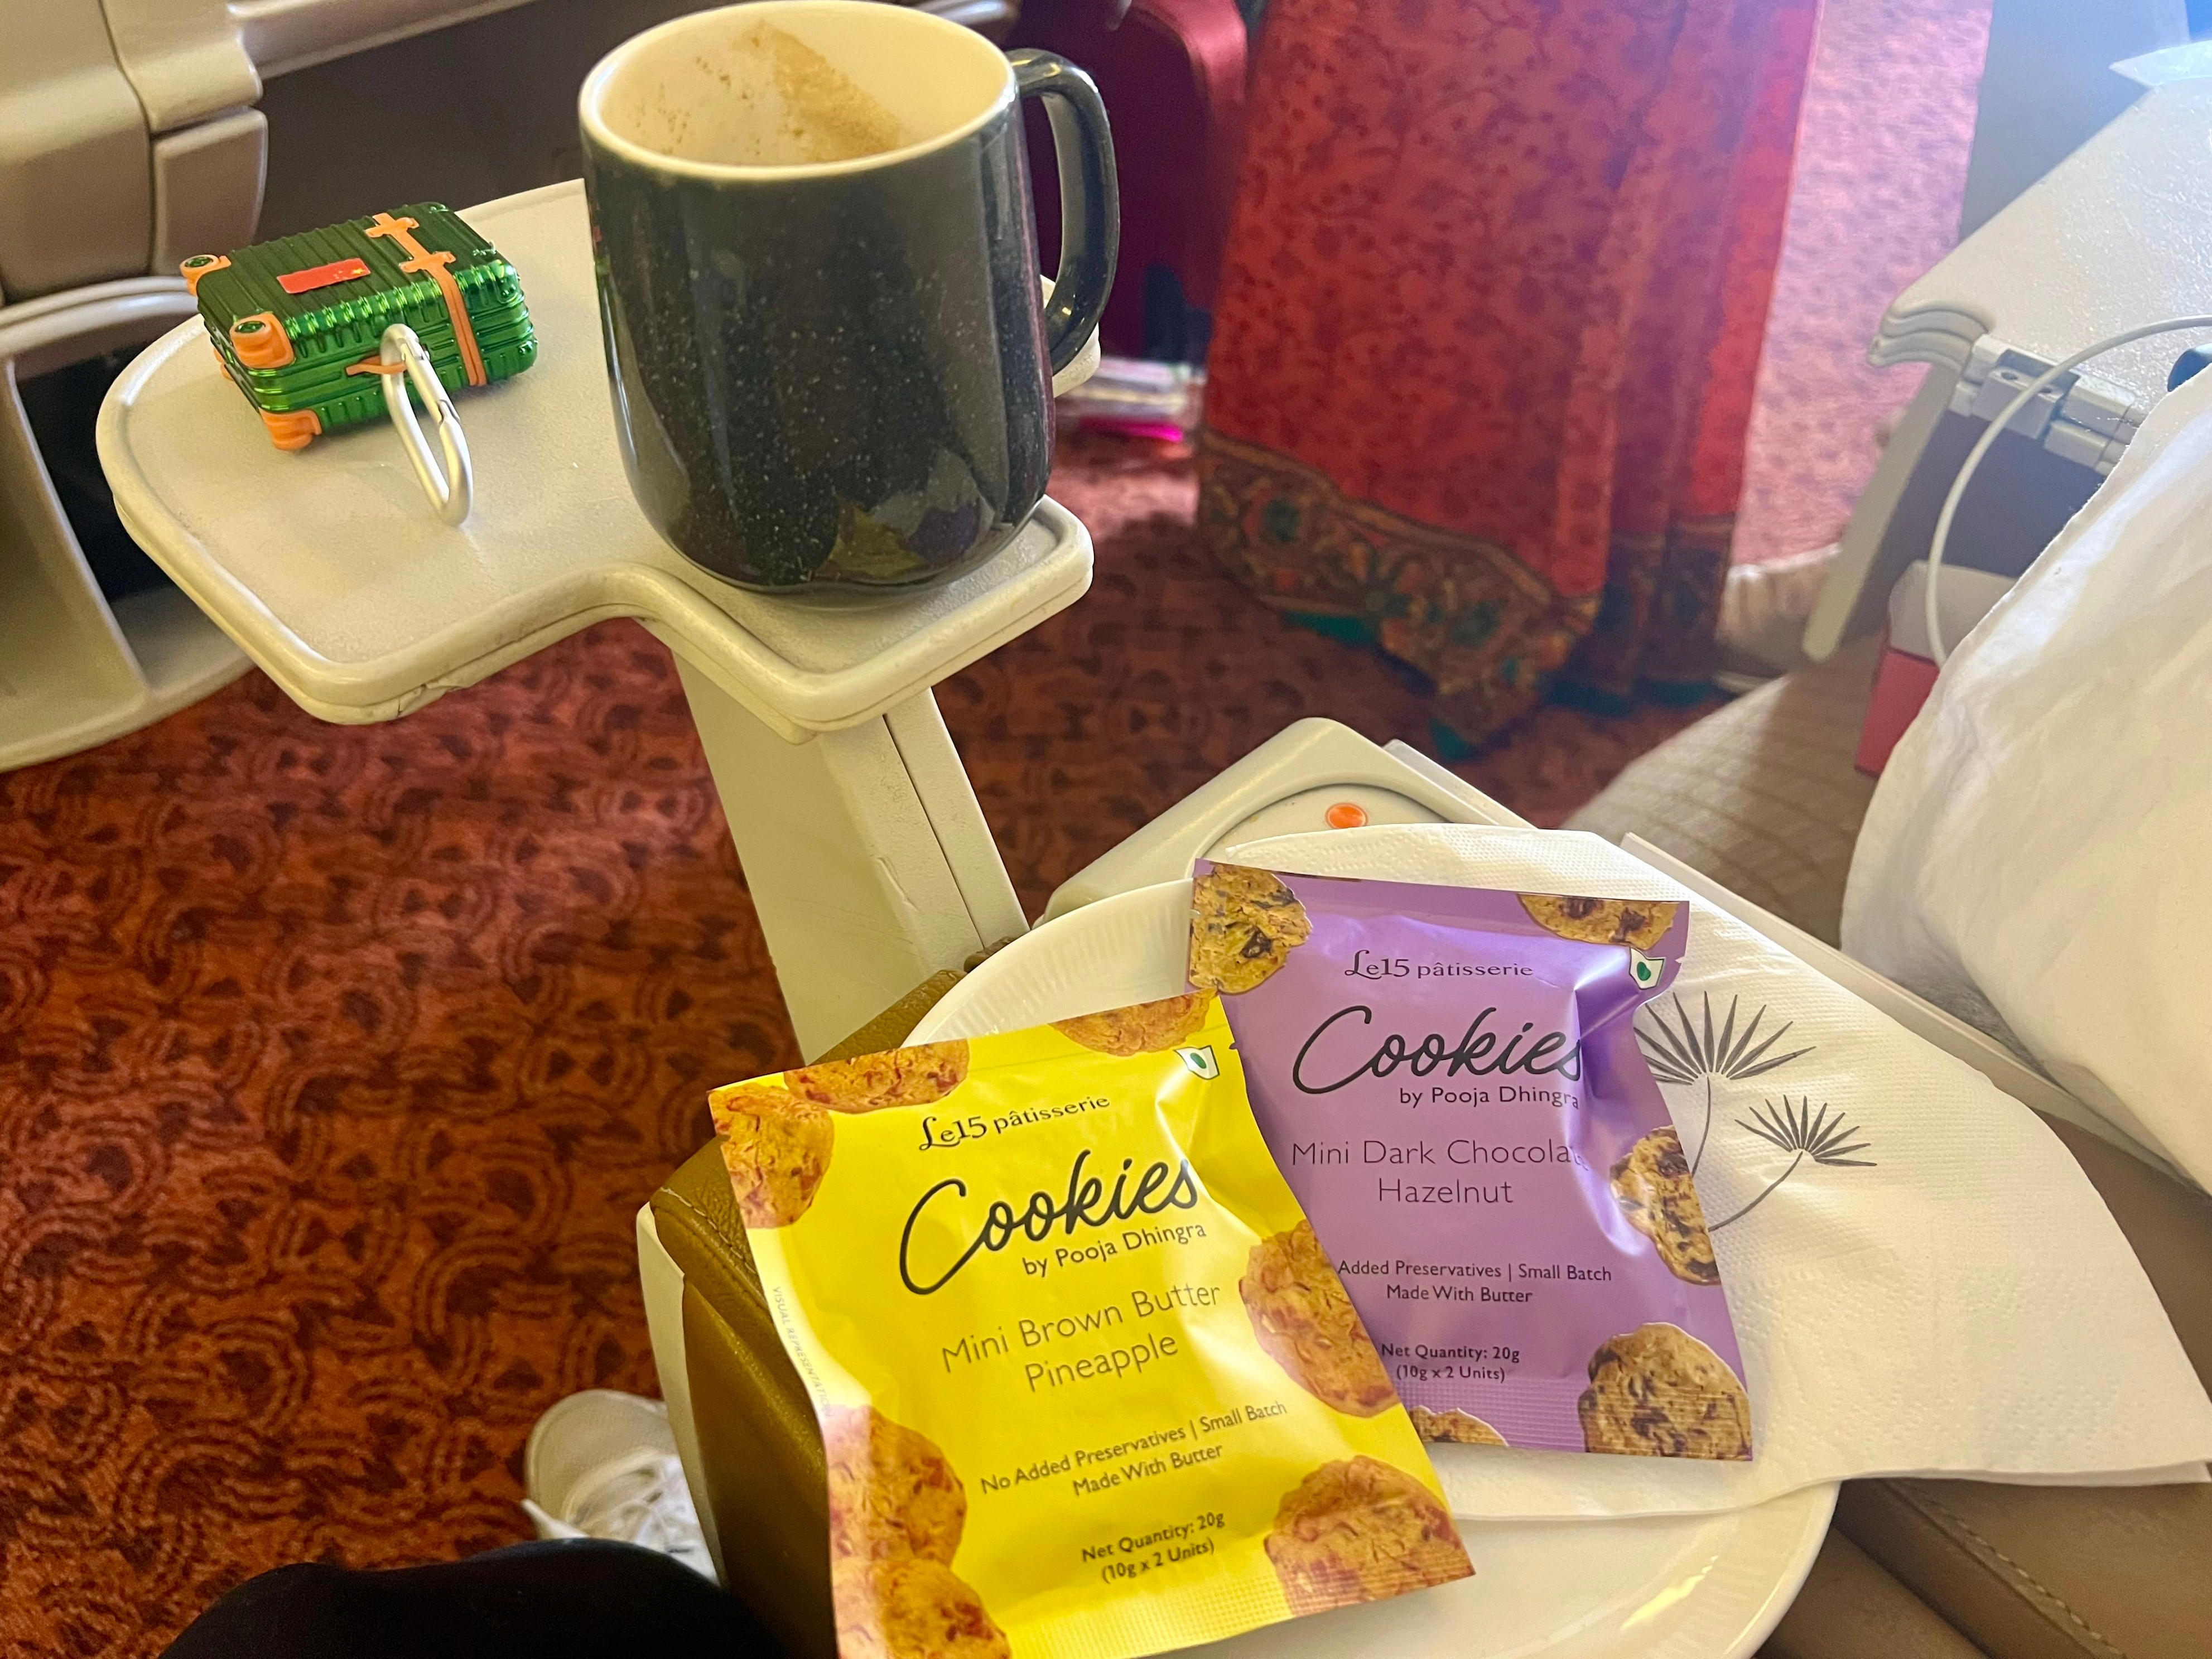 <p>I changed back into my regular clothes and enjoyed a cappuccino and cookies.</p>